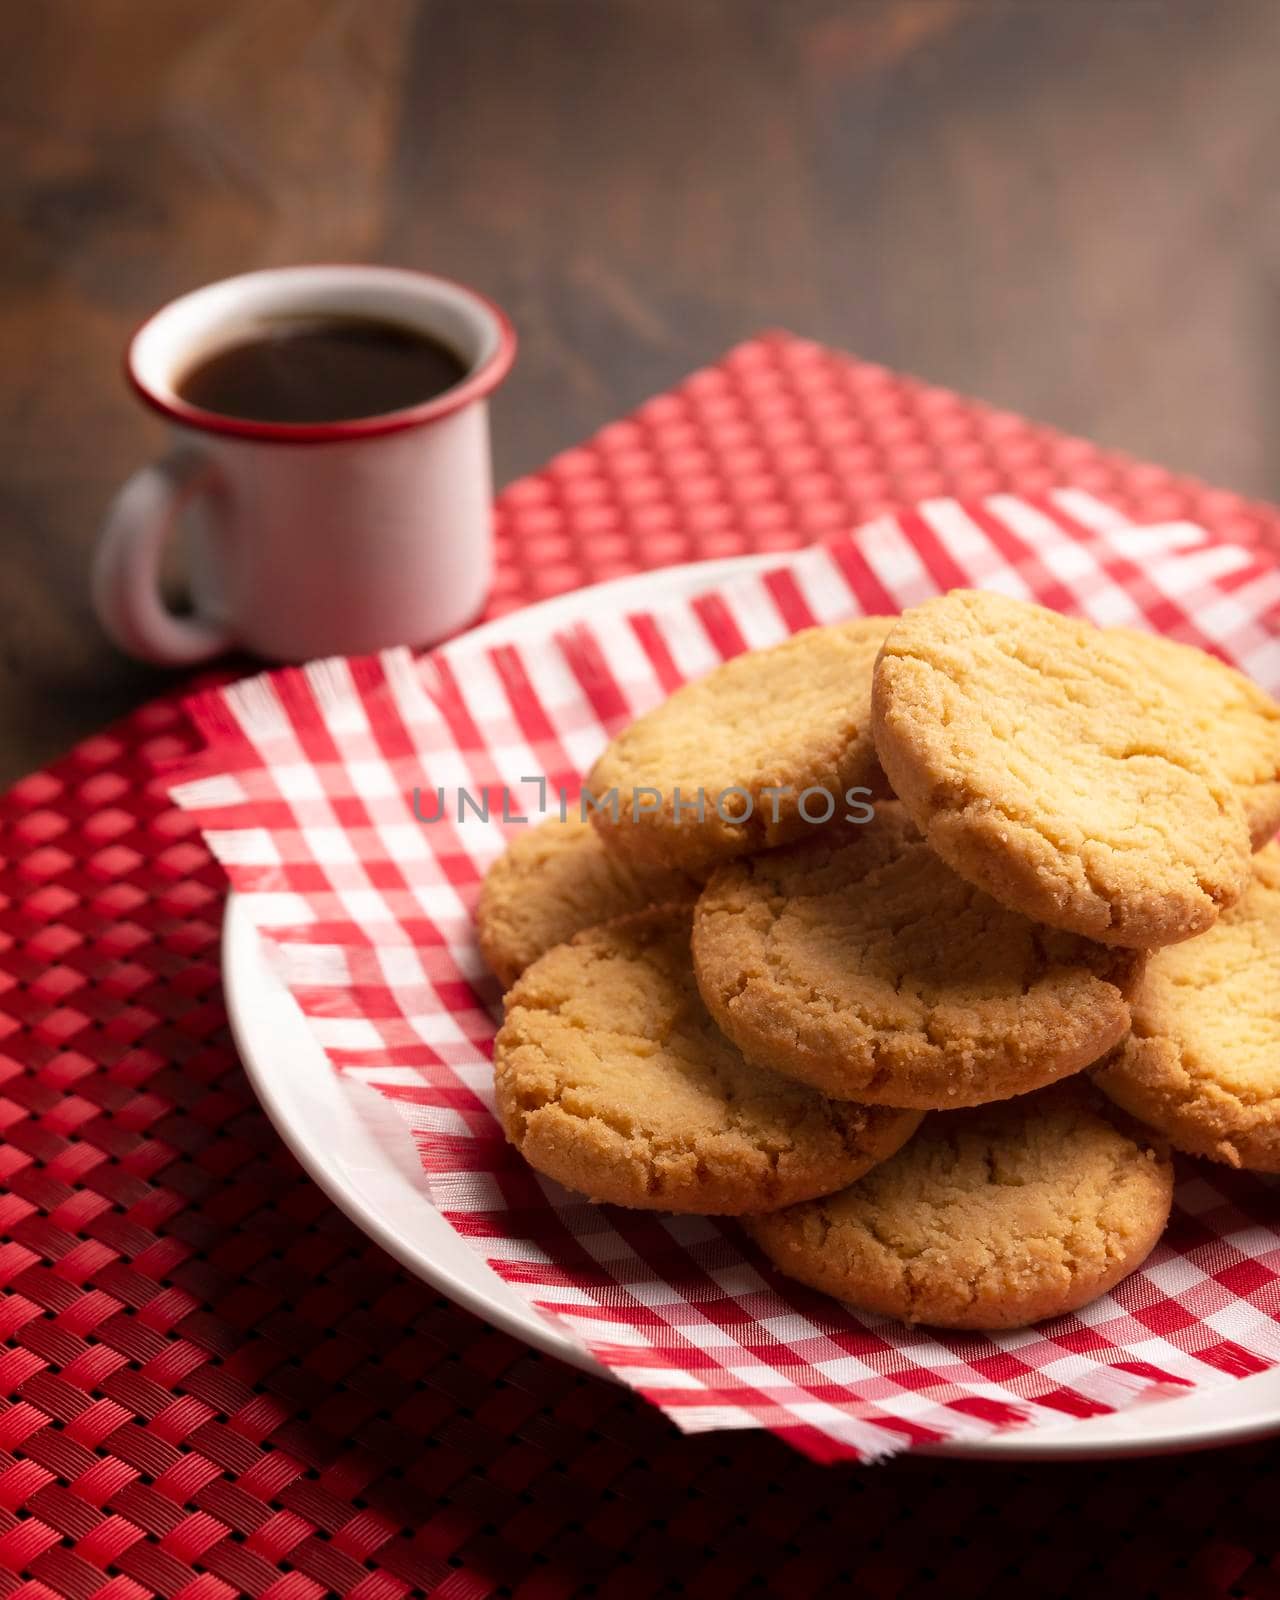 Homemade crunchy cookies and a espresso coffee cup on wooden table